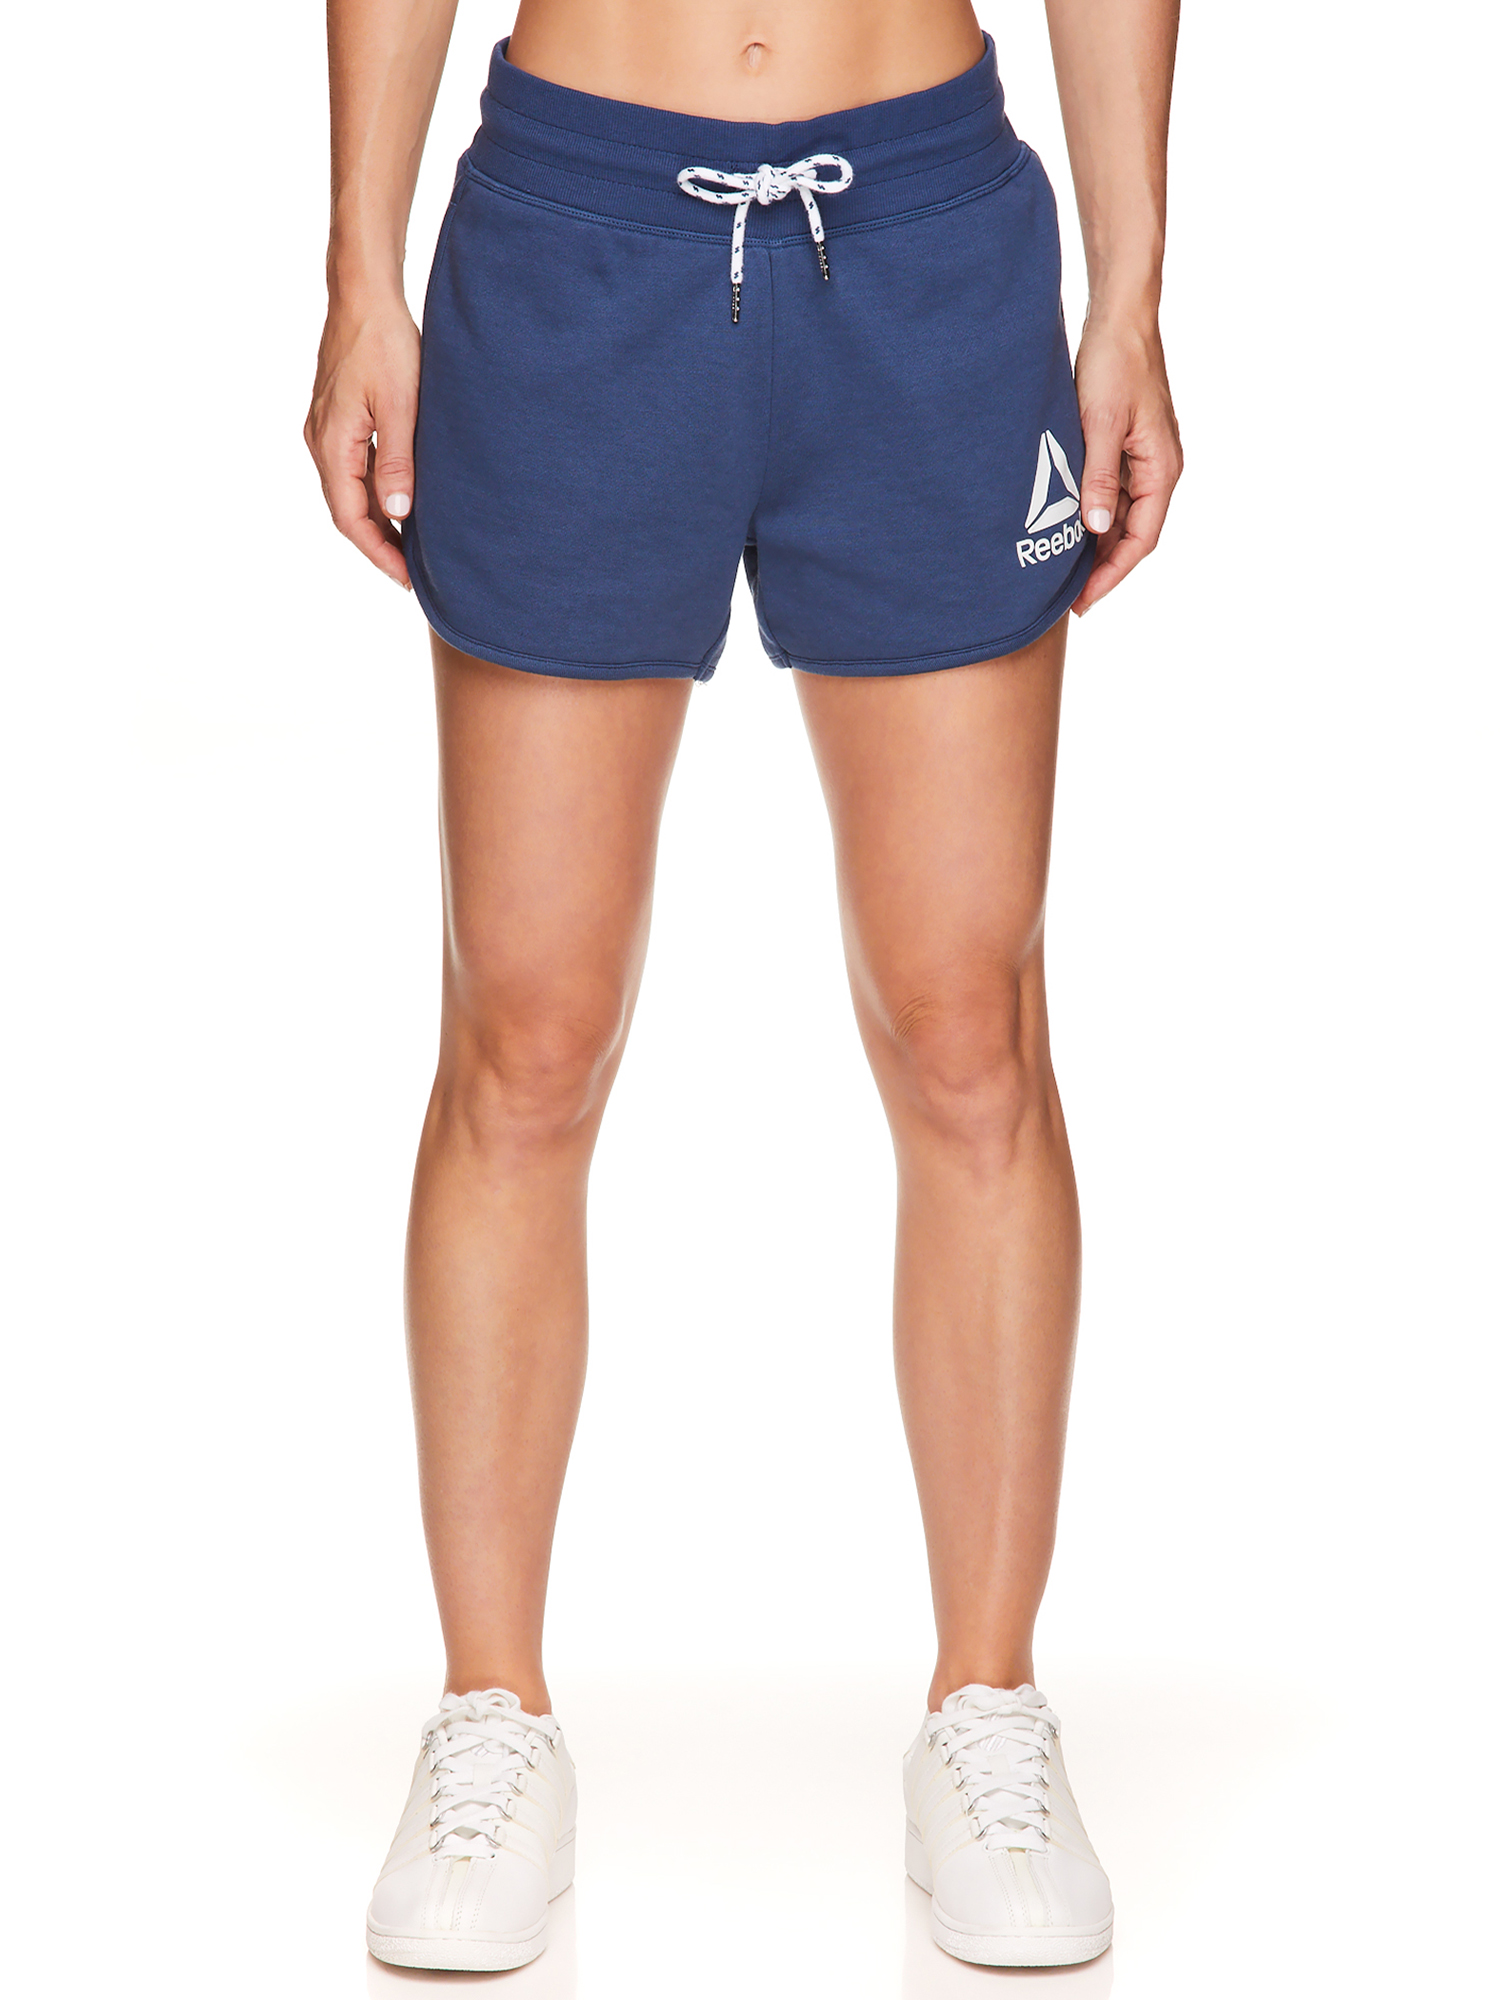 Reebok Womens Equity Graphic Athletic Shorts, 3.5" Inseam - image 1 of 4